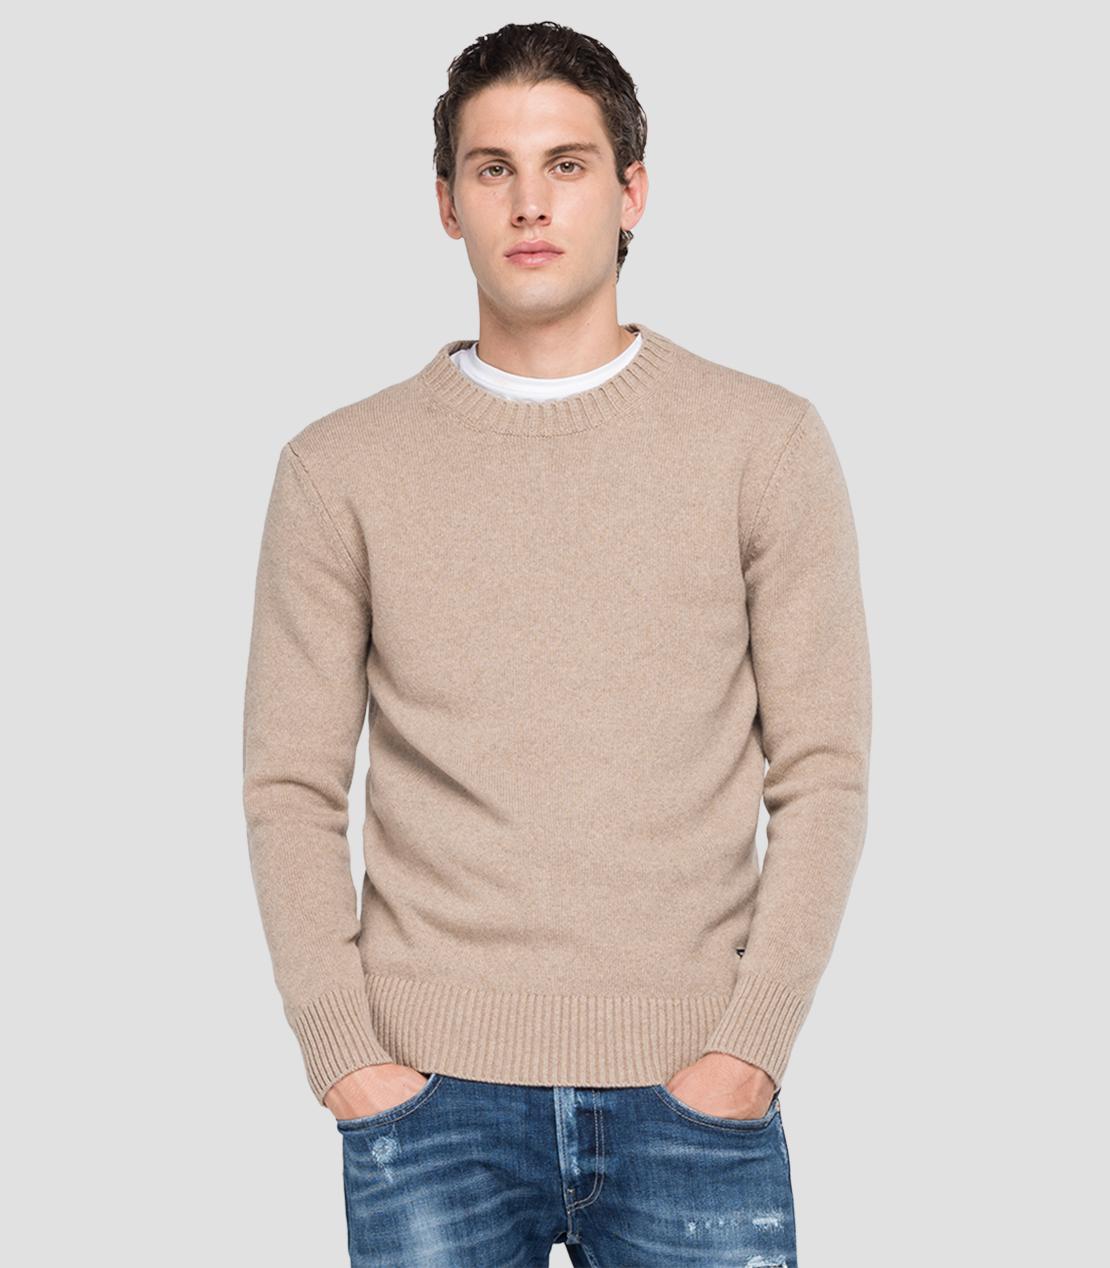 Replay Recycled Cashmere Crewneck Sweater - Sand (UK3081.000.G22736 ...